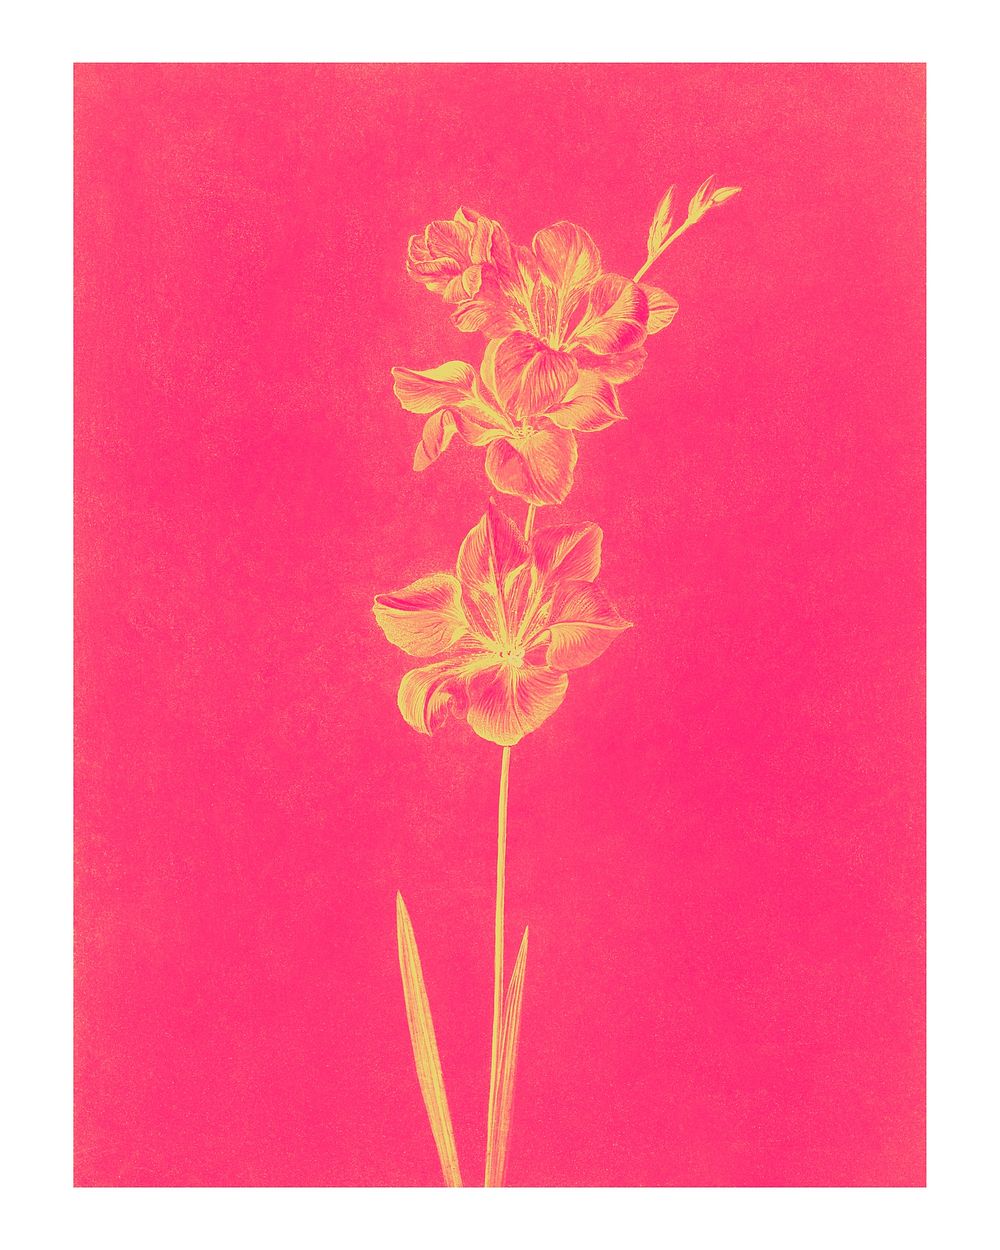 Vintage Lily illustration wall art print and poster design remix from original artwork.